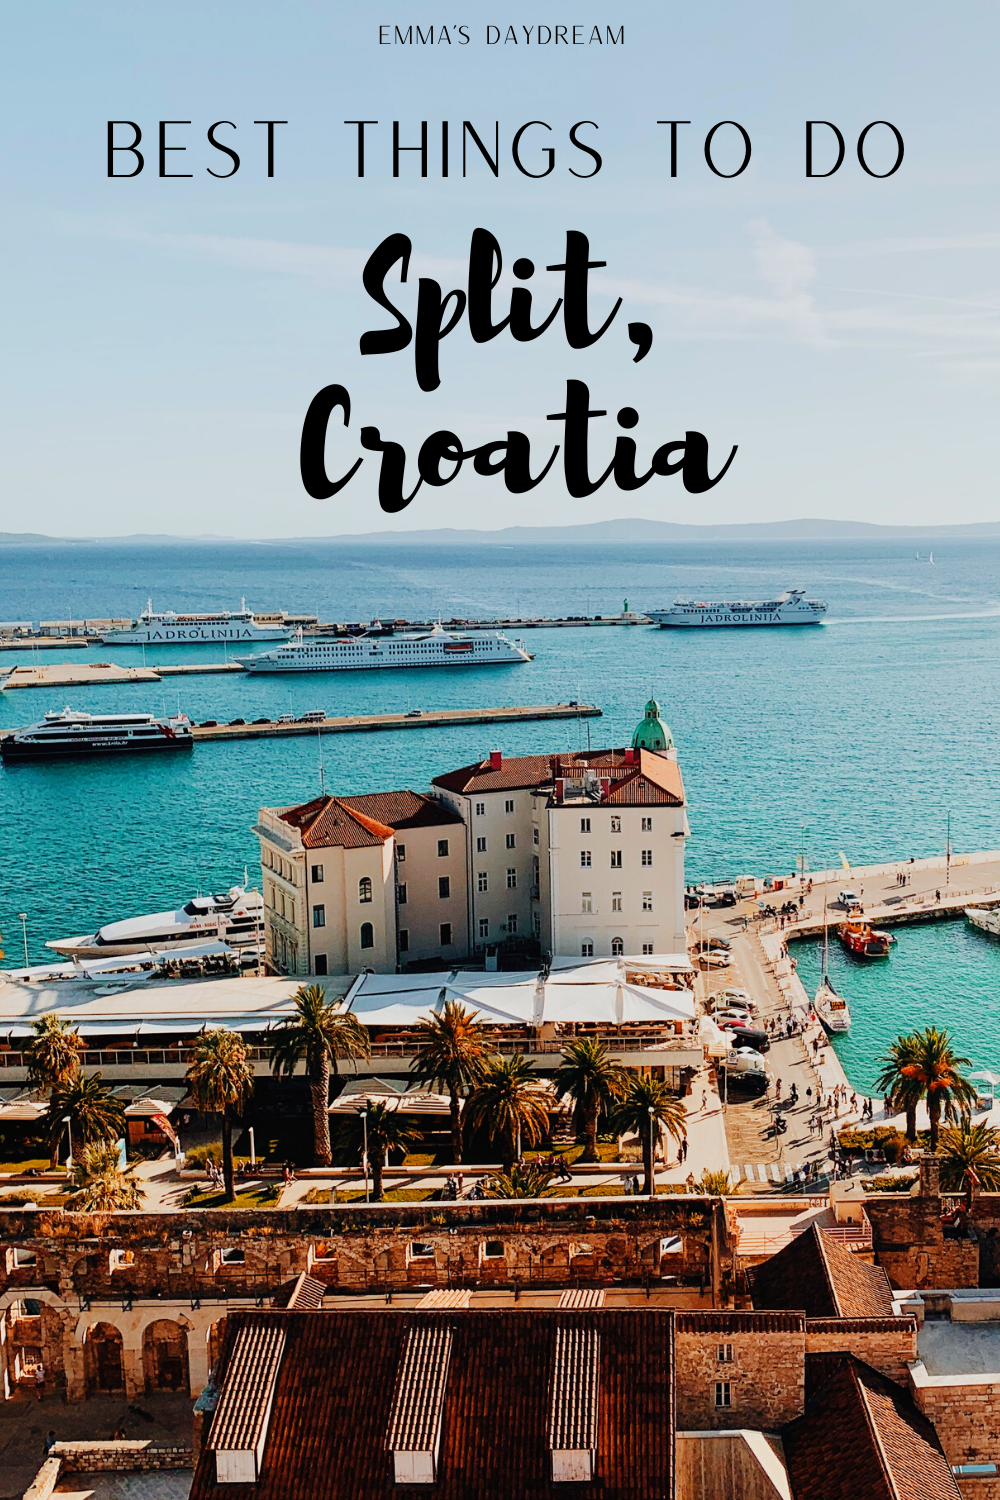 top 7 things to do in Split, Croatia: a 2 day itinerary for Split, Croatia